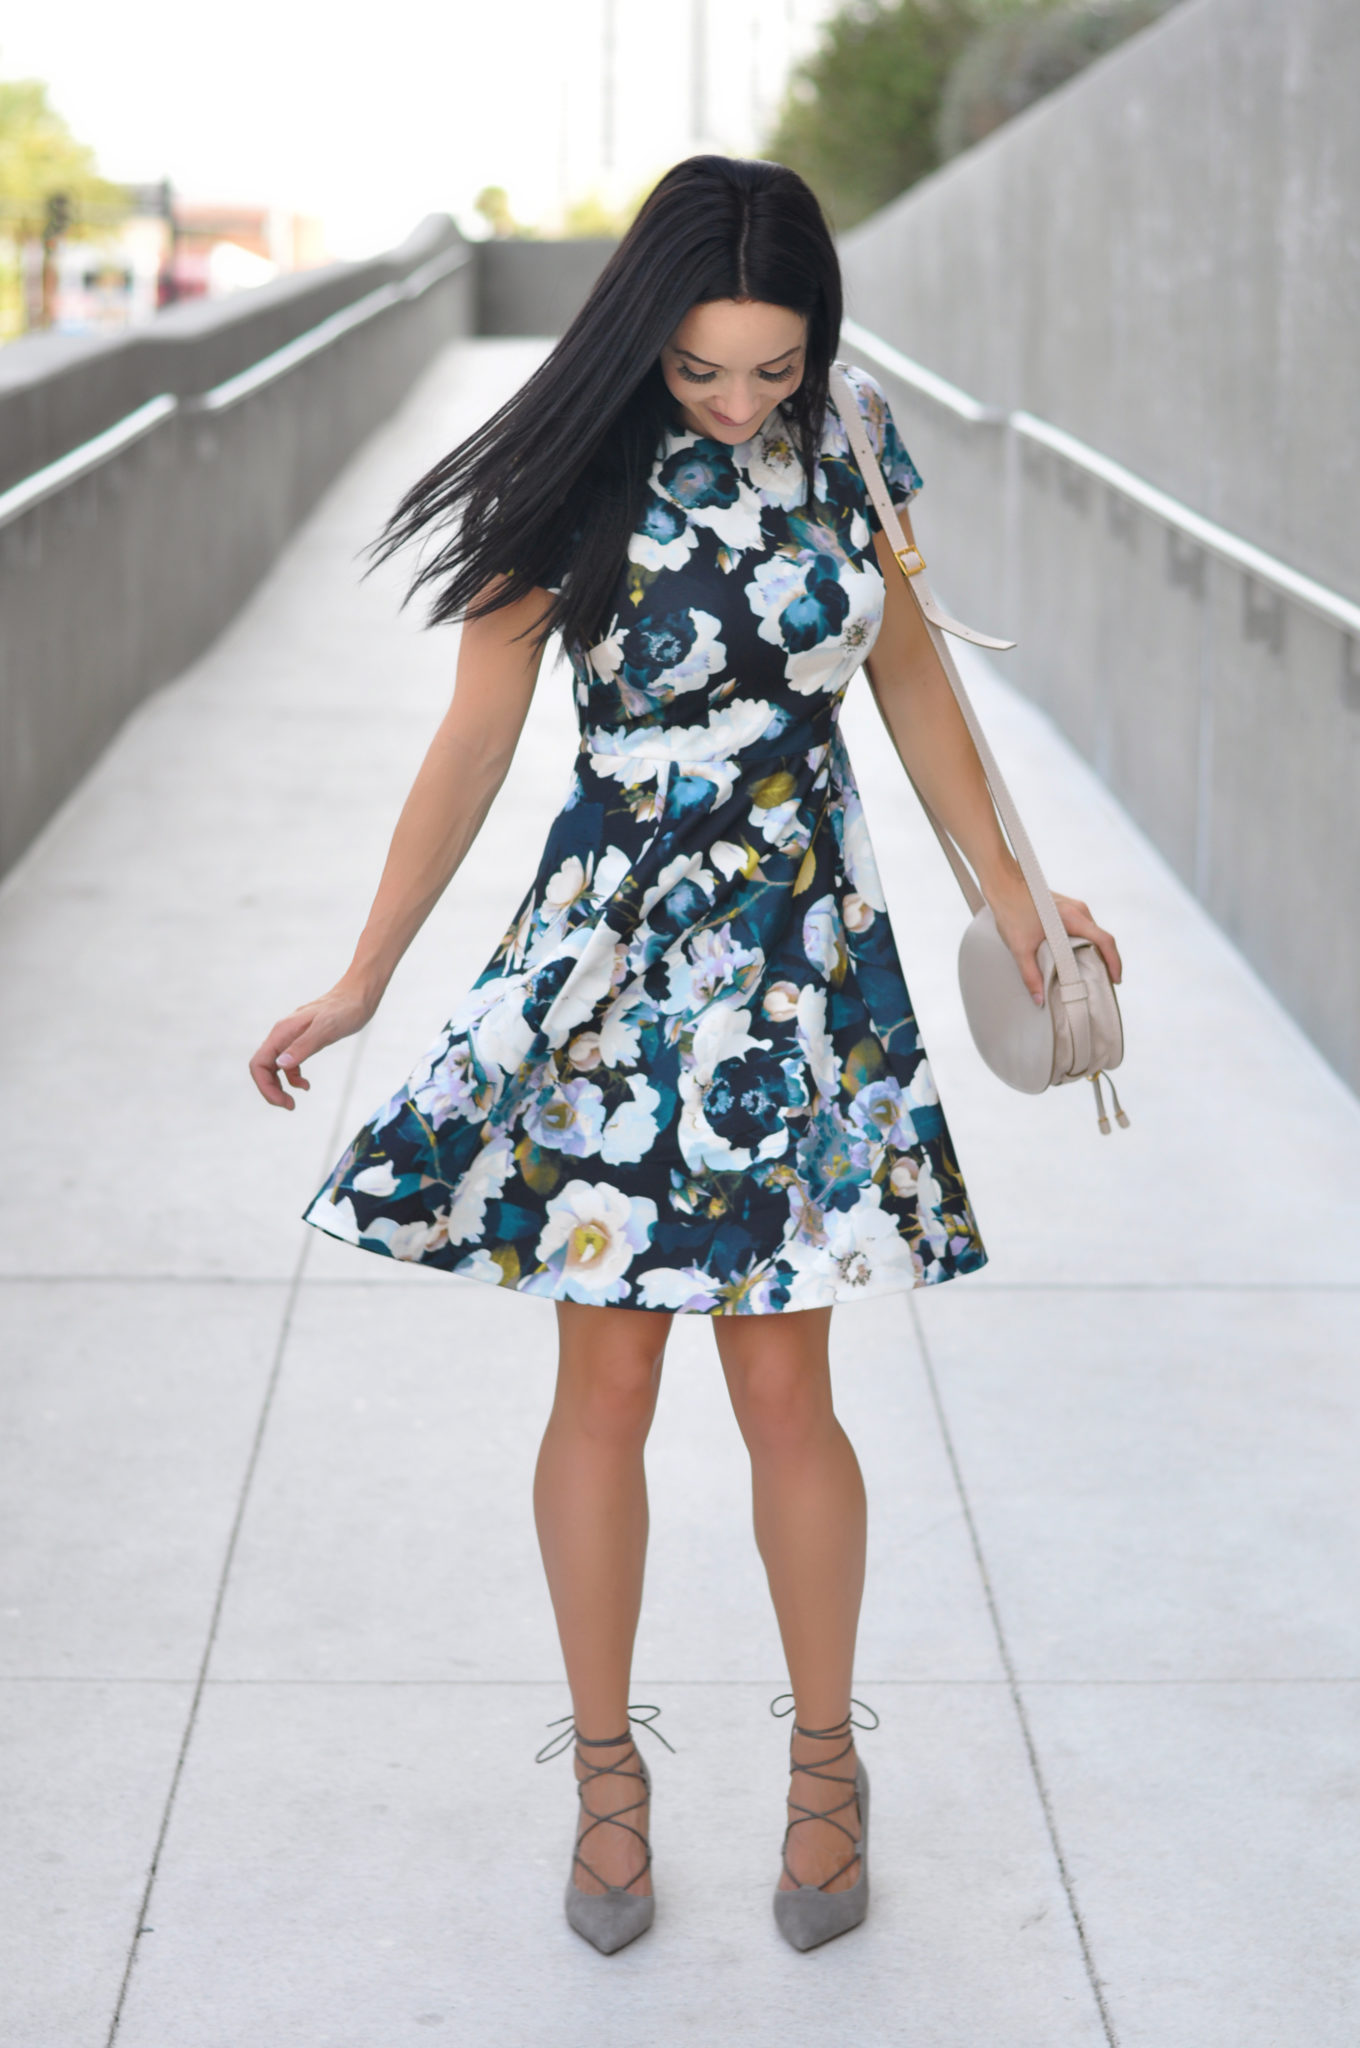 Cute Spring Outfits featured by top US fashion blog Outfits & Outings; Image of a woman wearing floral dress.